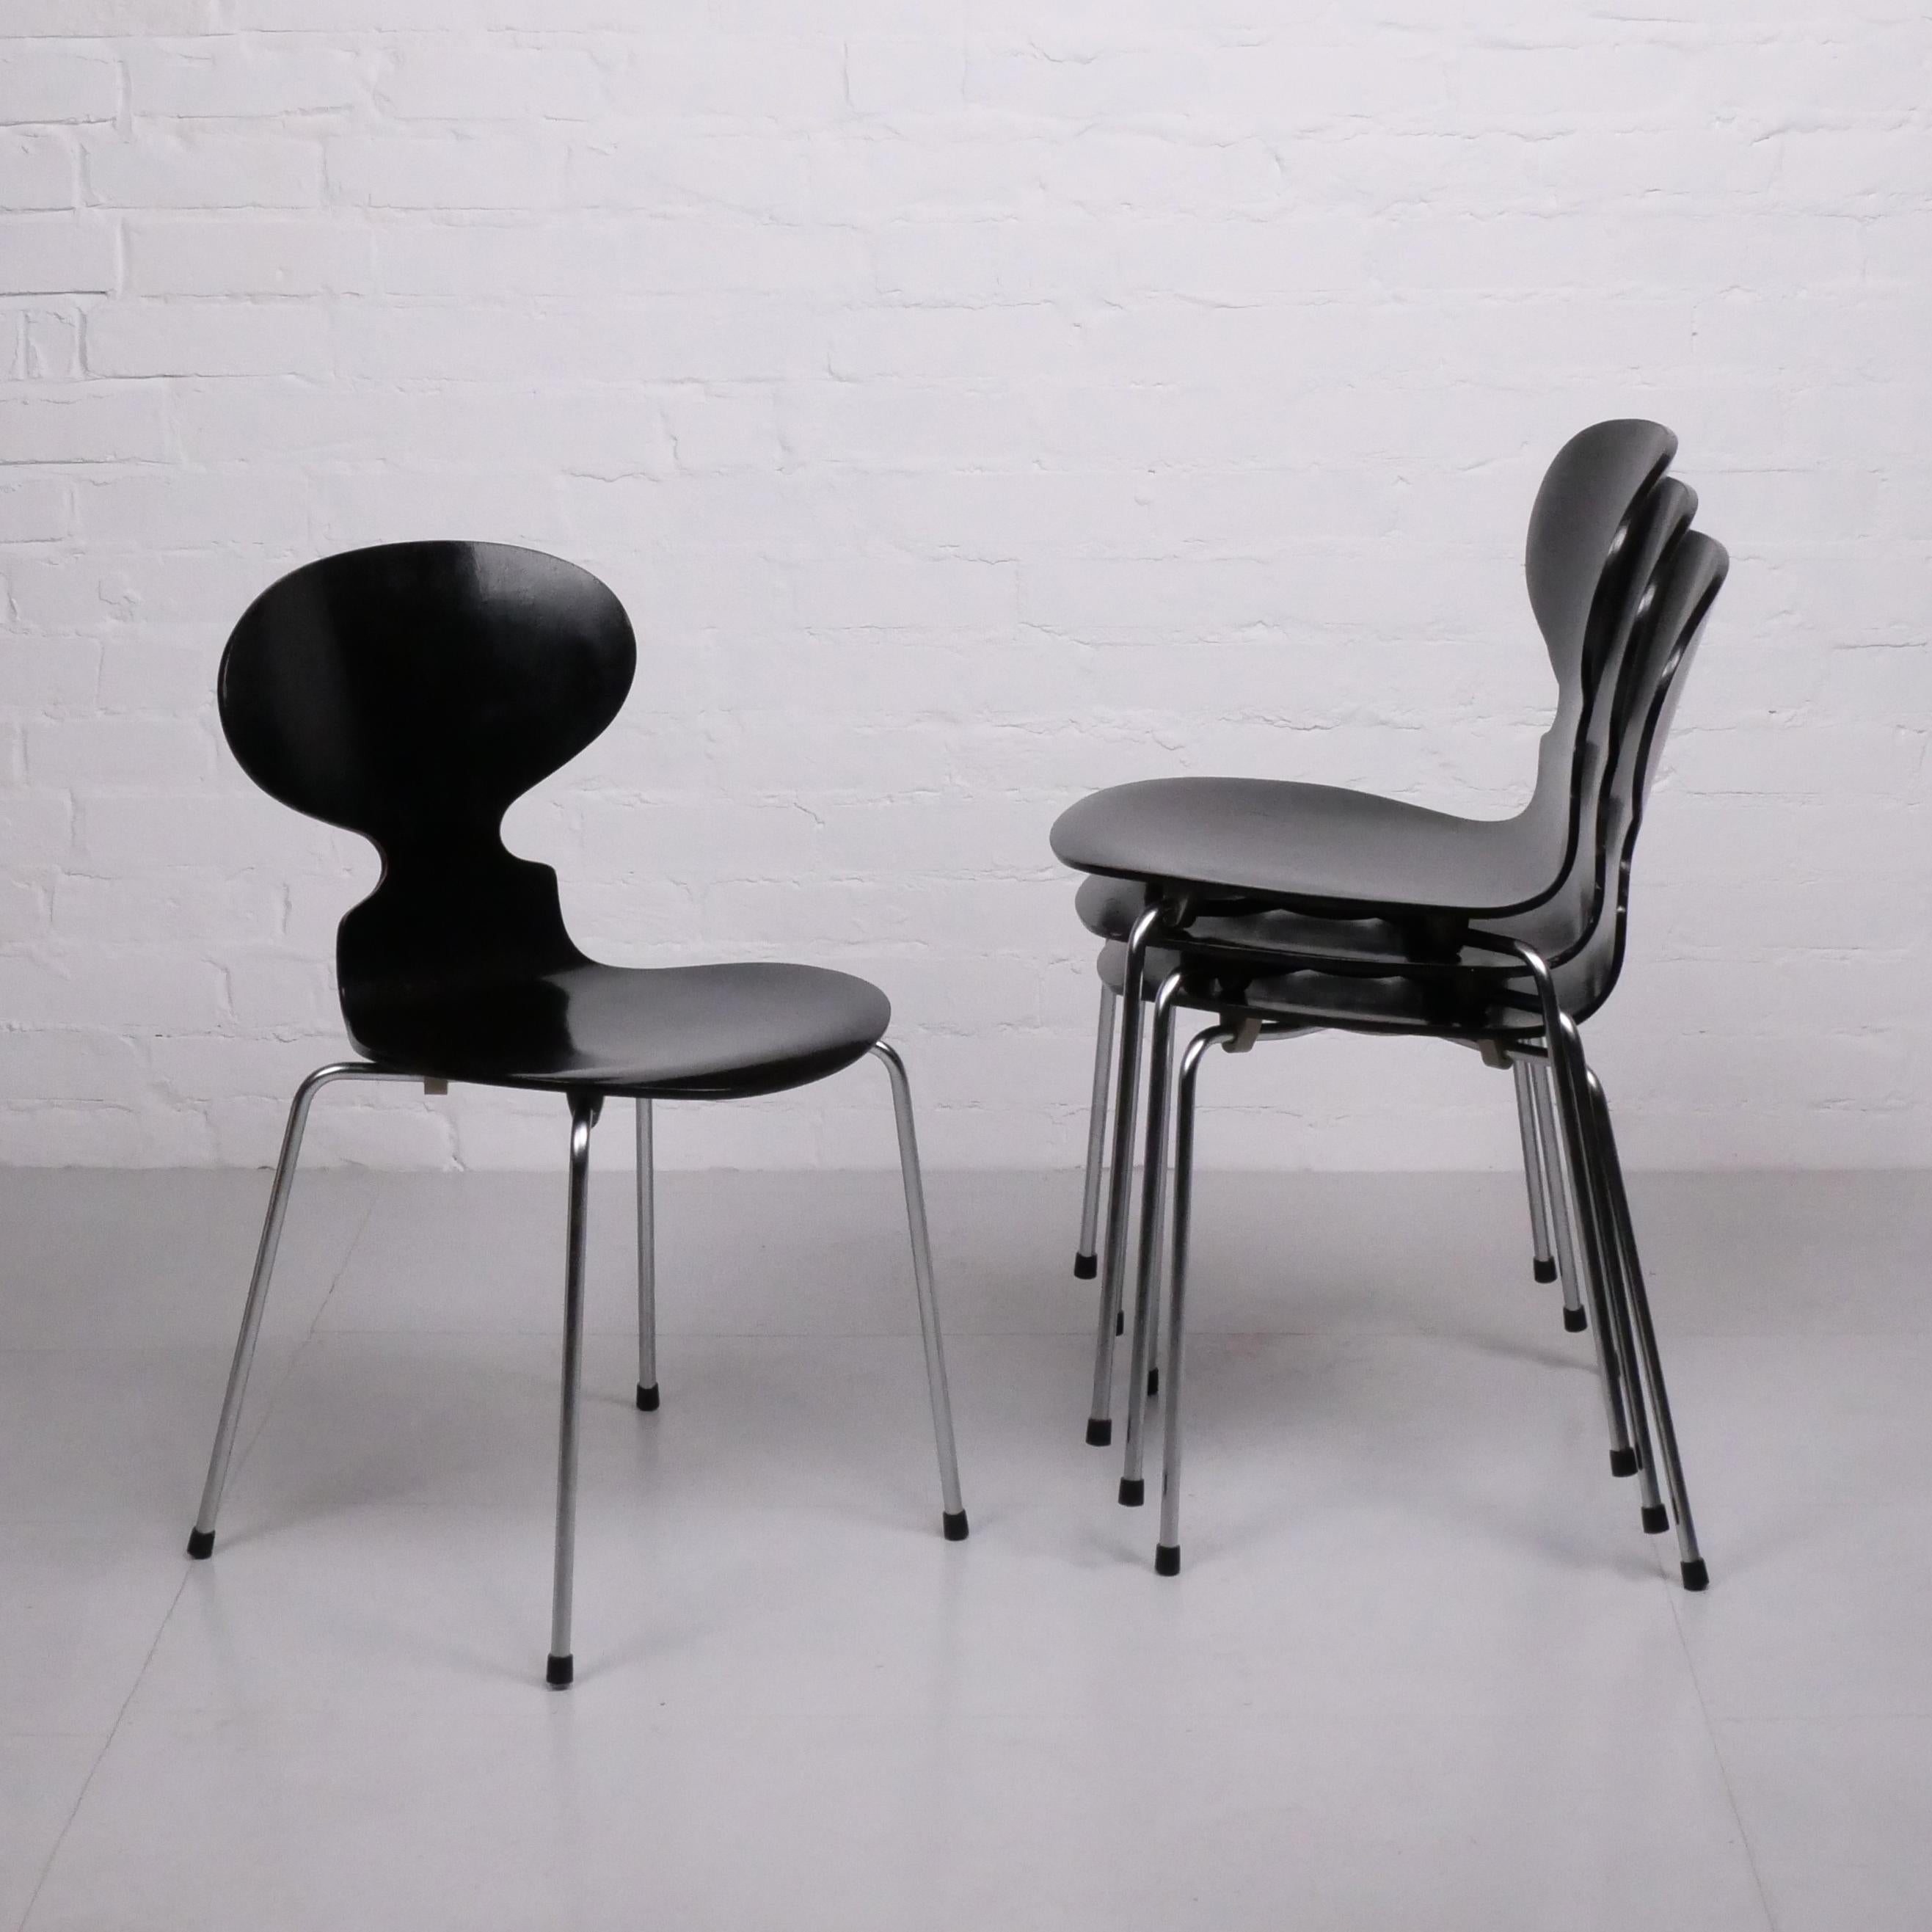 Molded Set of 4 ‘Ant’ Chairs by Arne Jacobsen for Fritz Hansen, 2 early sets available